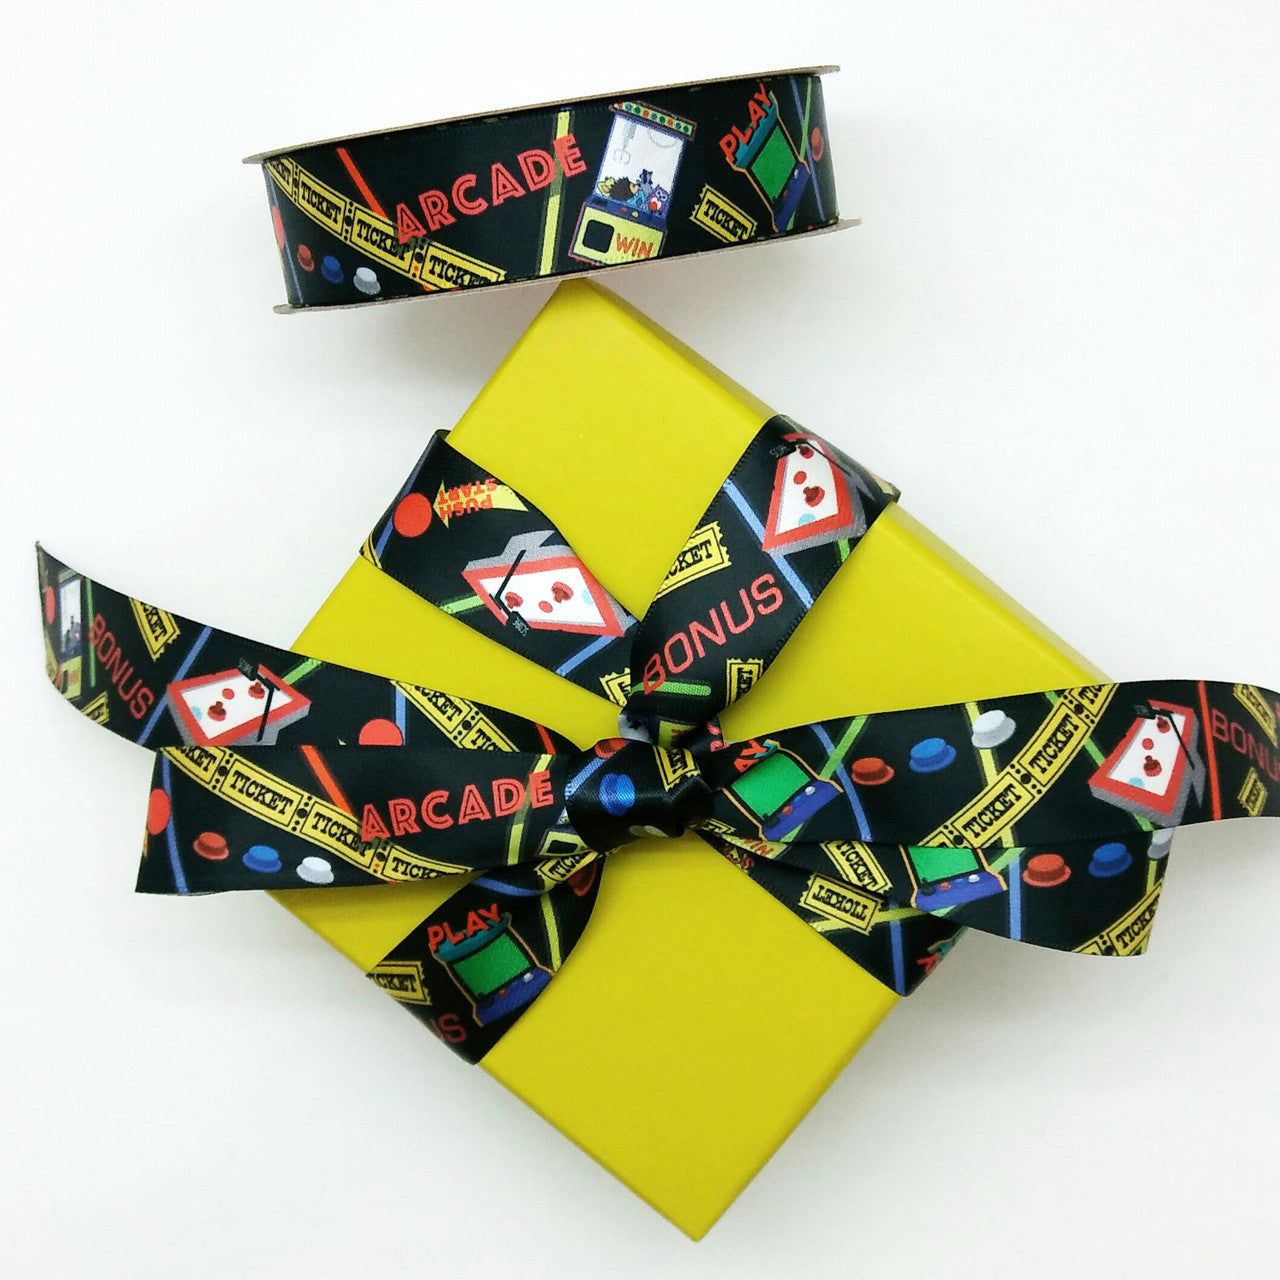 Tie our Arcade themed ribbon on a fun colored box to carry the theme of the party to the next level! Designed and printed in the USA